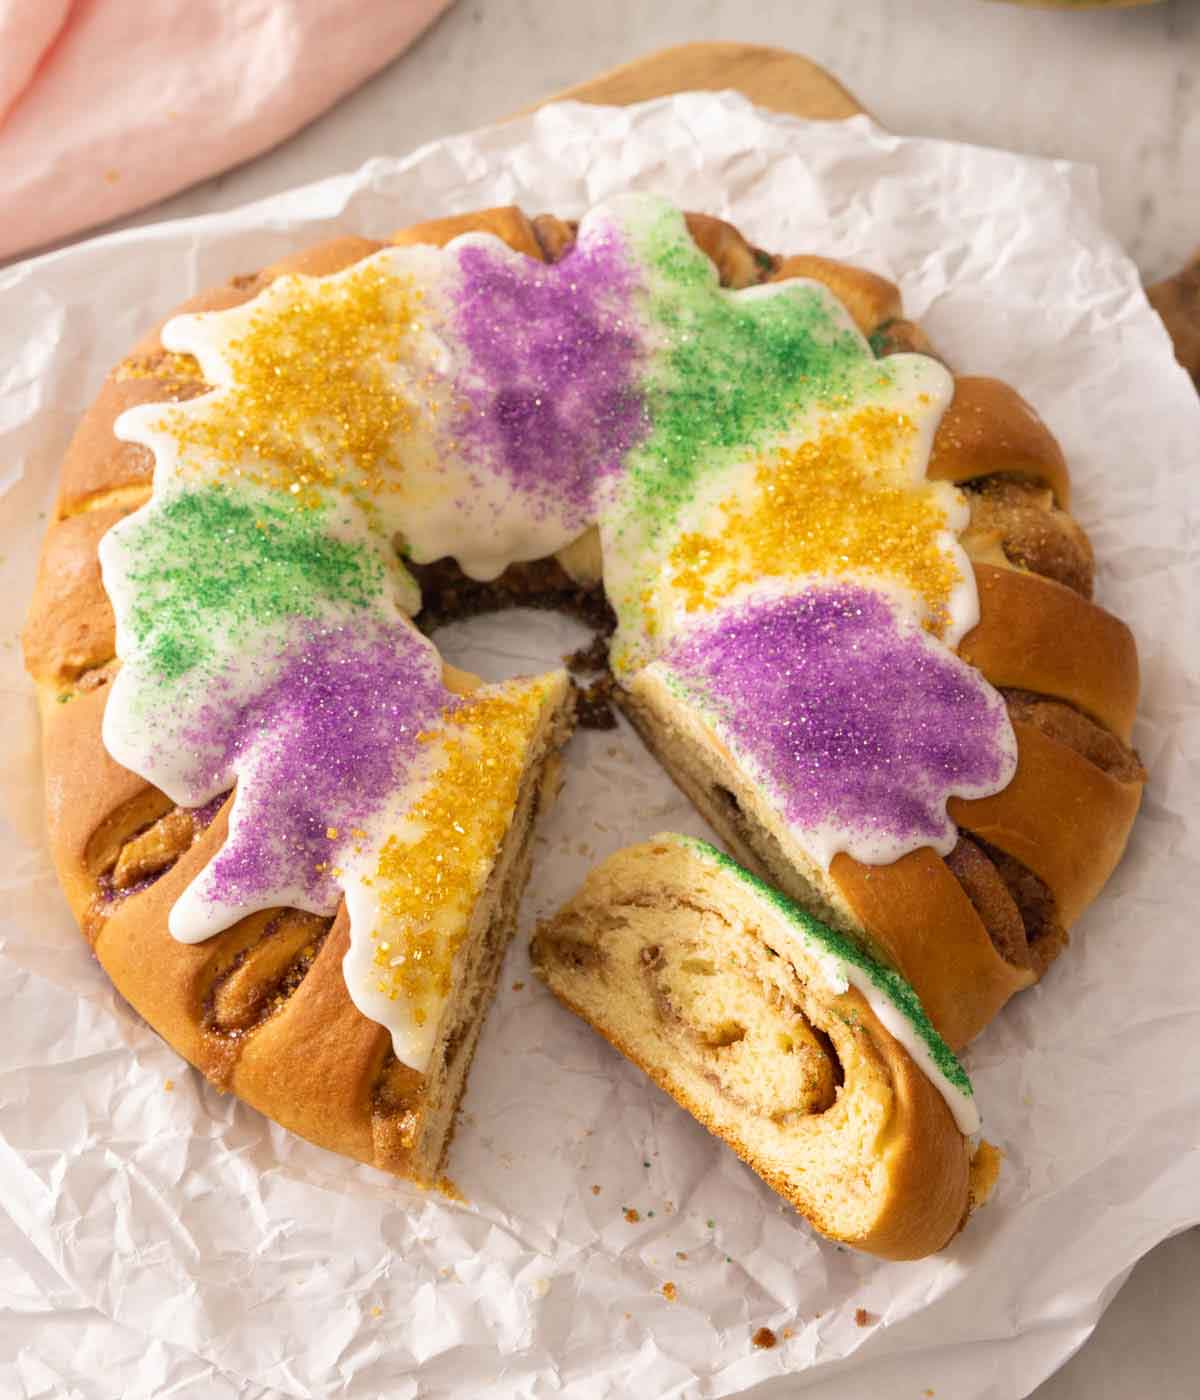 Overhead view of a king cake with purple, green, and yellow sanding sugar with a slice cut.